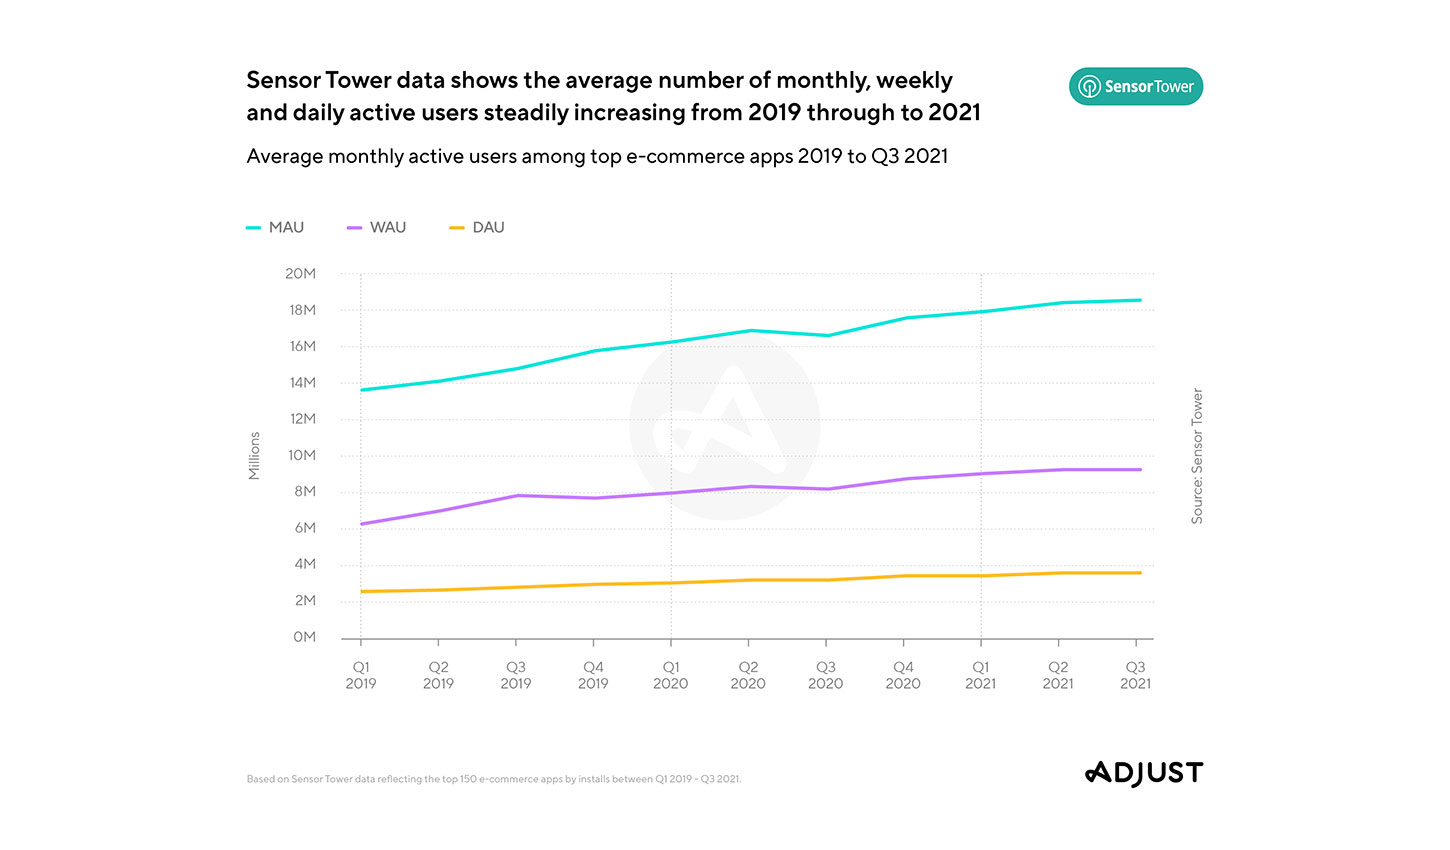 Shopping Apps Average Active Users Increased in 2021